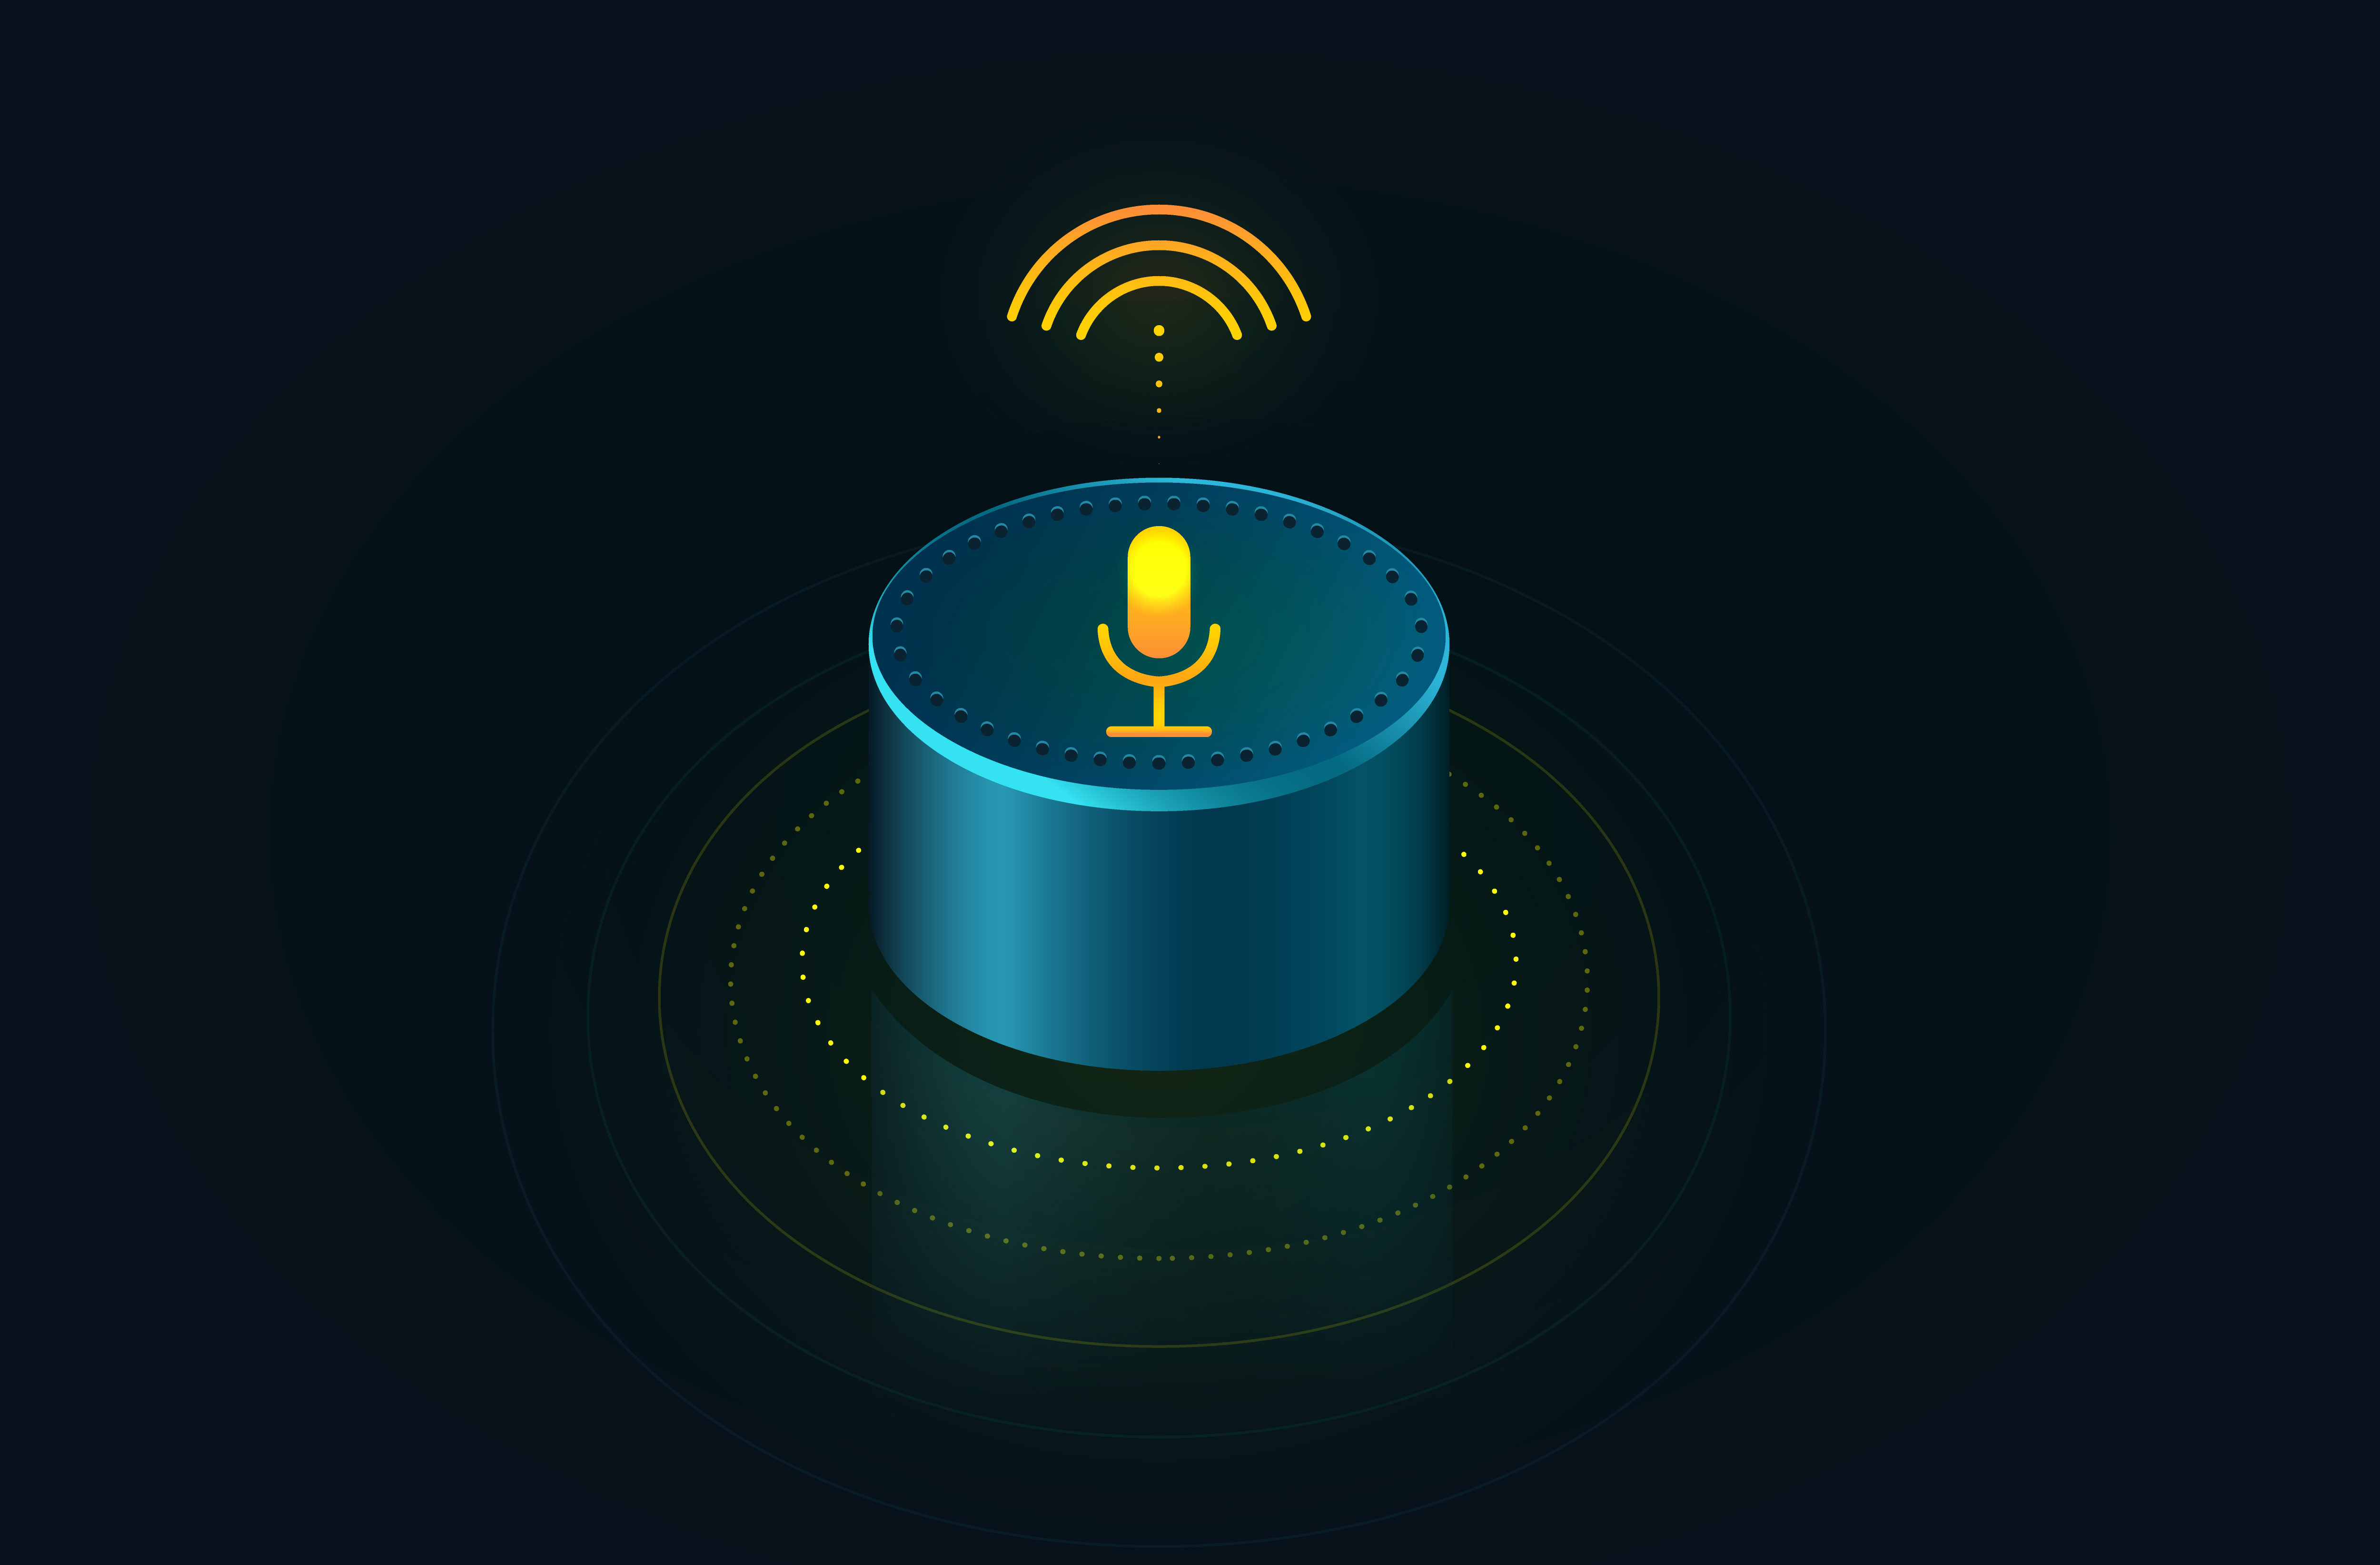 optimize your site for voice search